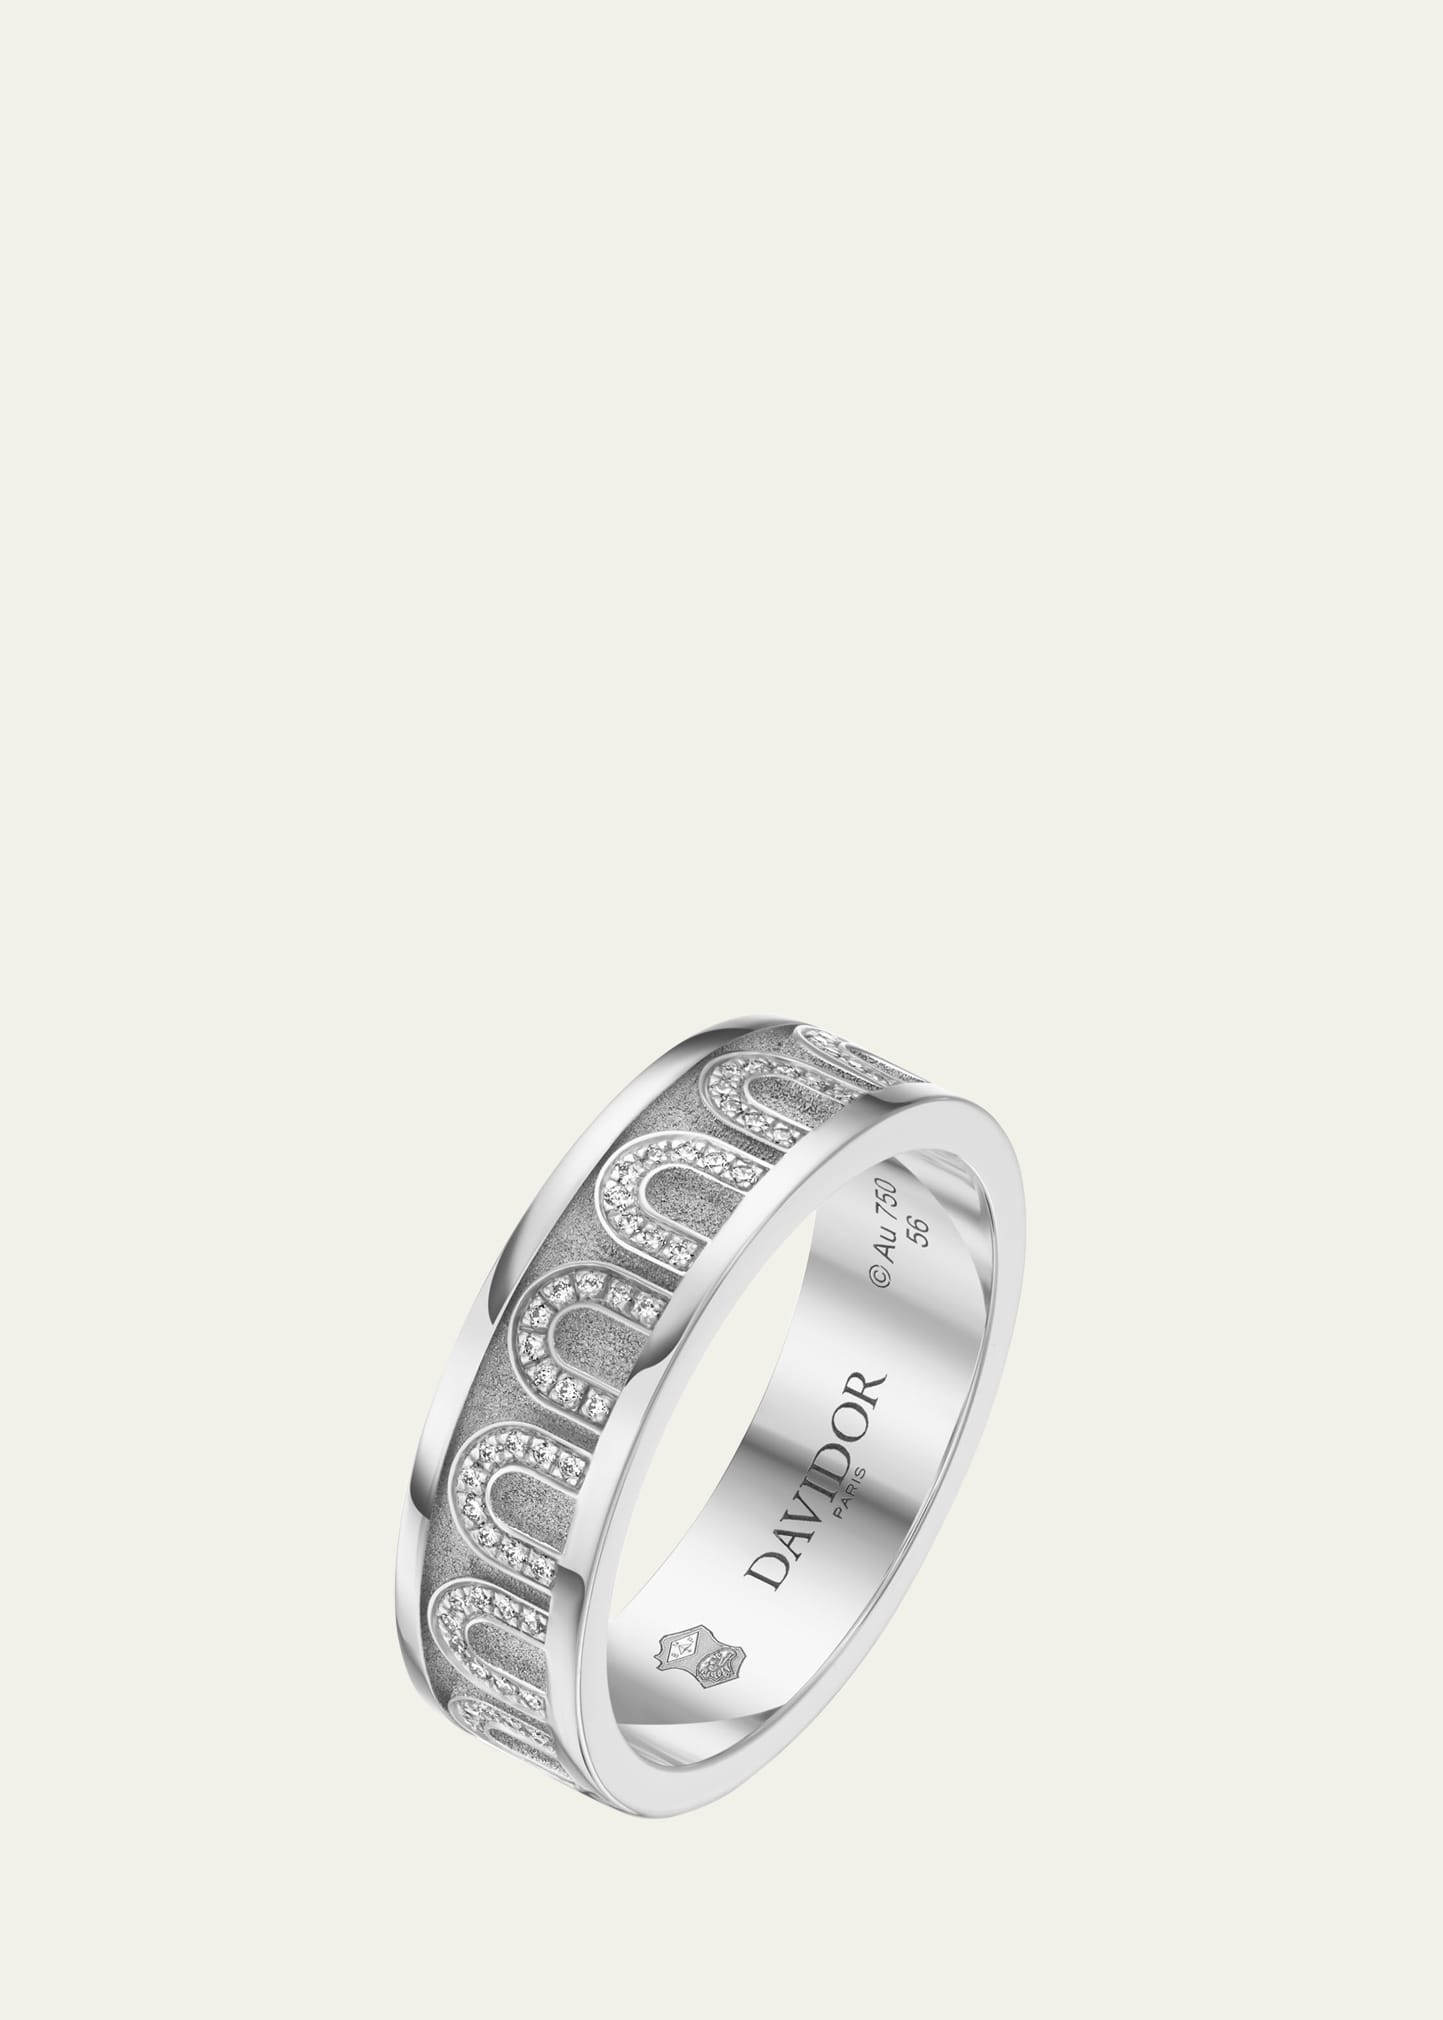 Davidor L'arc De  Ring Mm In 18k White Gold With Satin Finish And Arcade Diamonds In Metallic